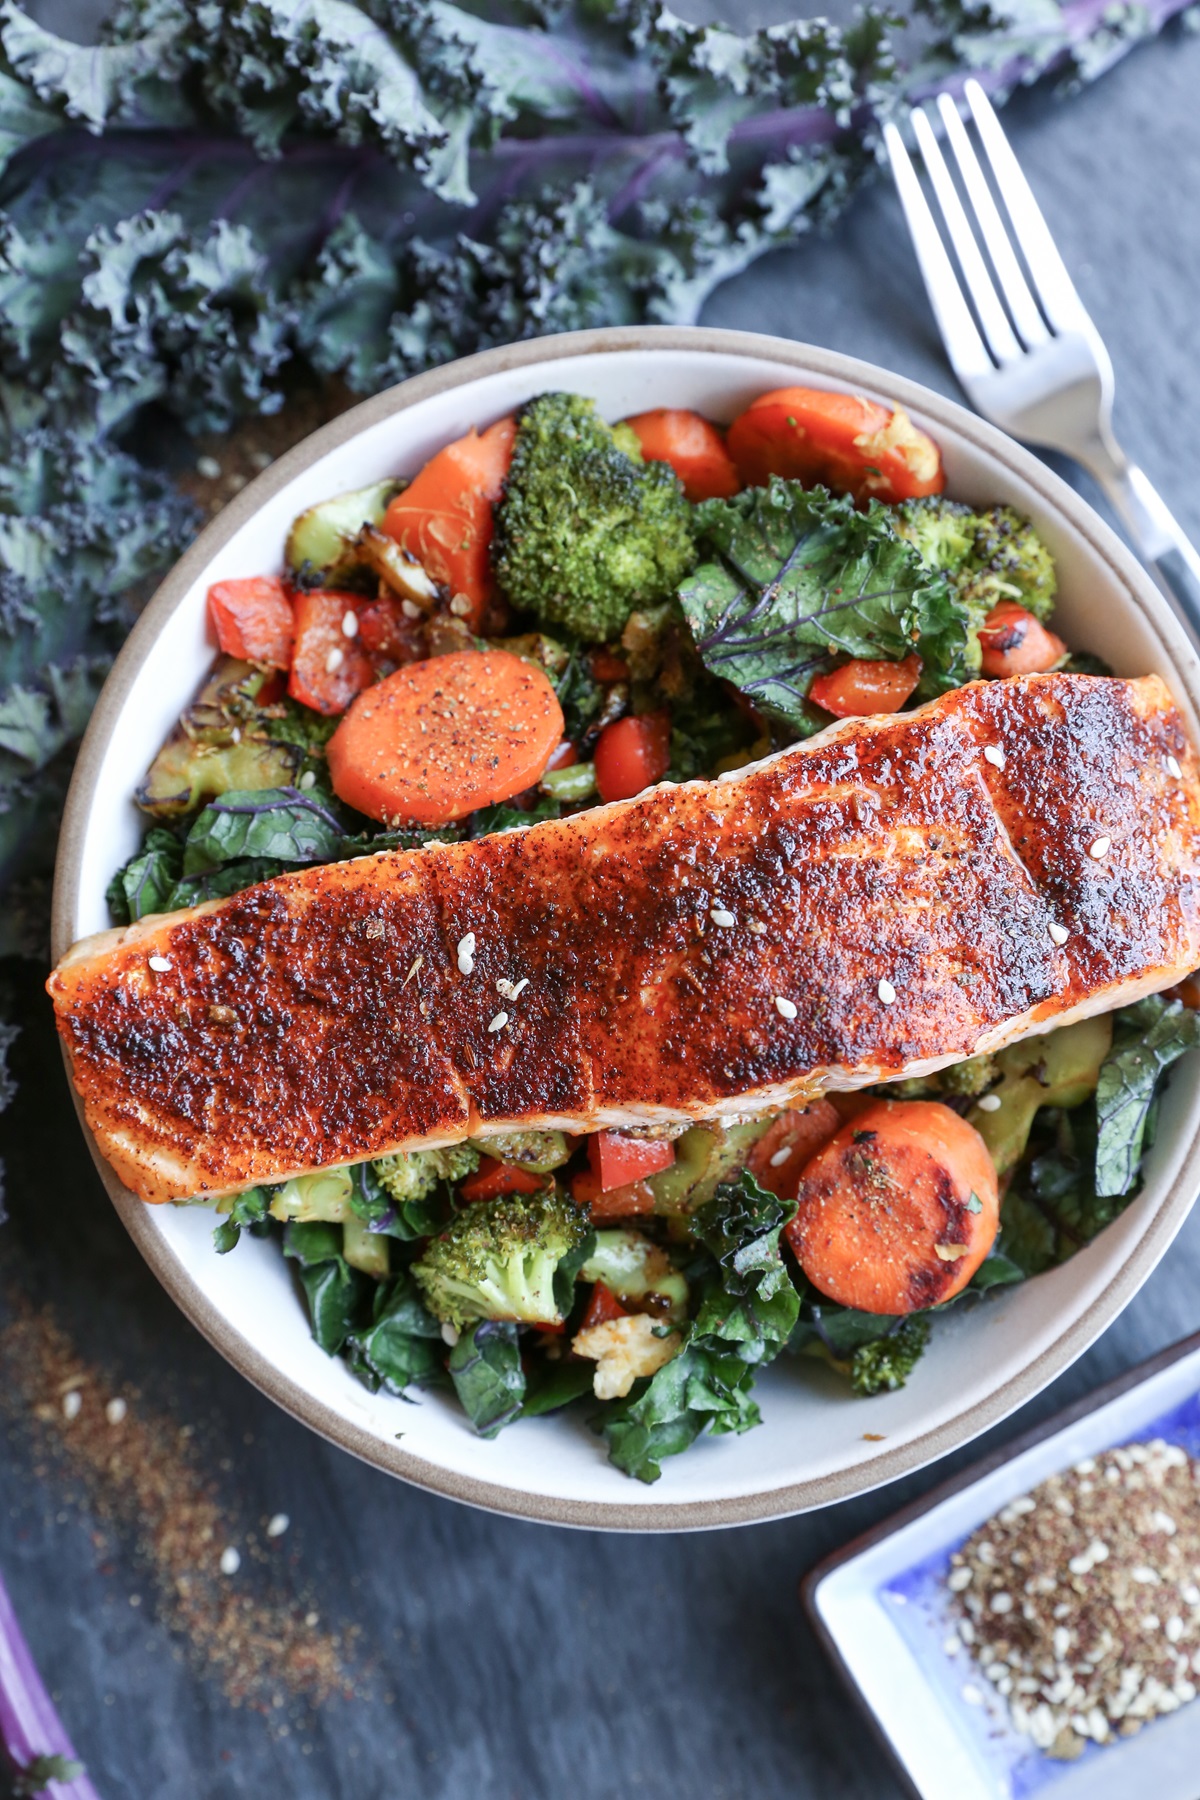 Crispy Salmon and Vegetable Stir Fry - an easy and delicious healthy dinner recipe that only takes 30 minutes to prepare